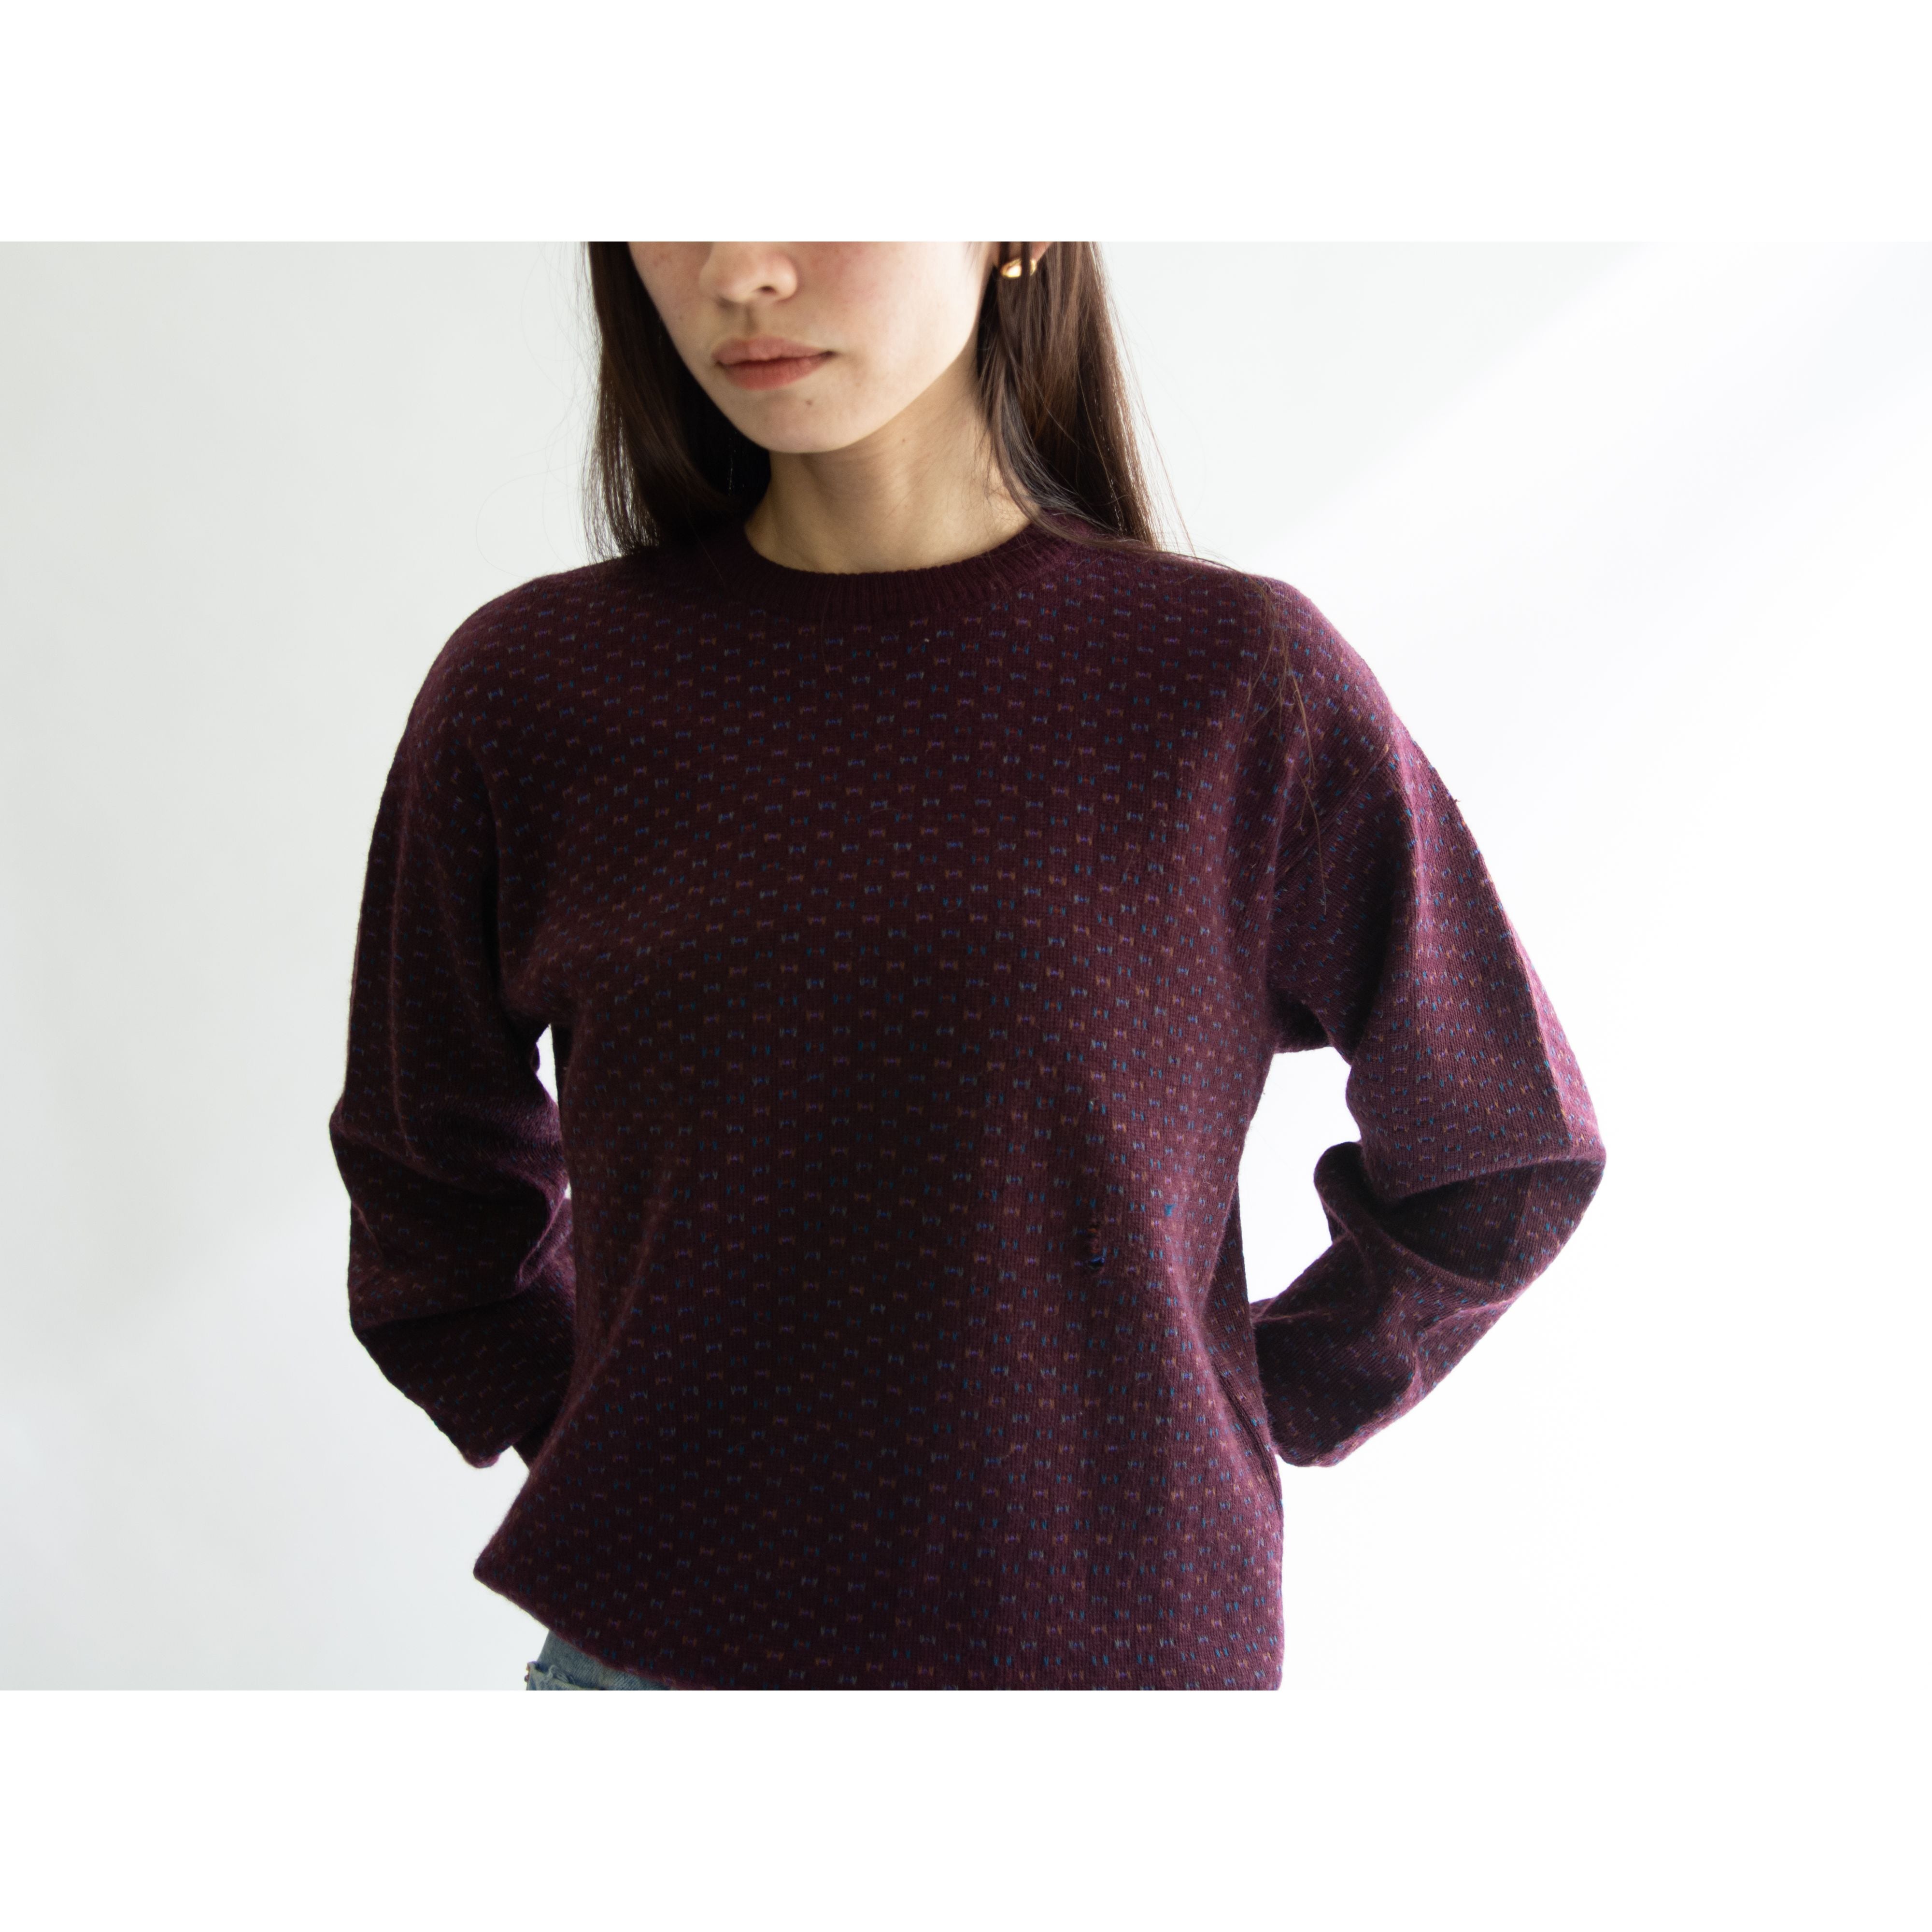 tricots st. raphael】Made in Uruguay 100% virgin wool crew neck